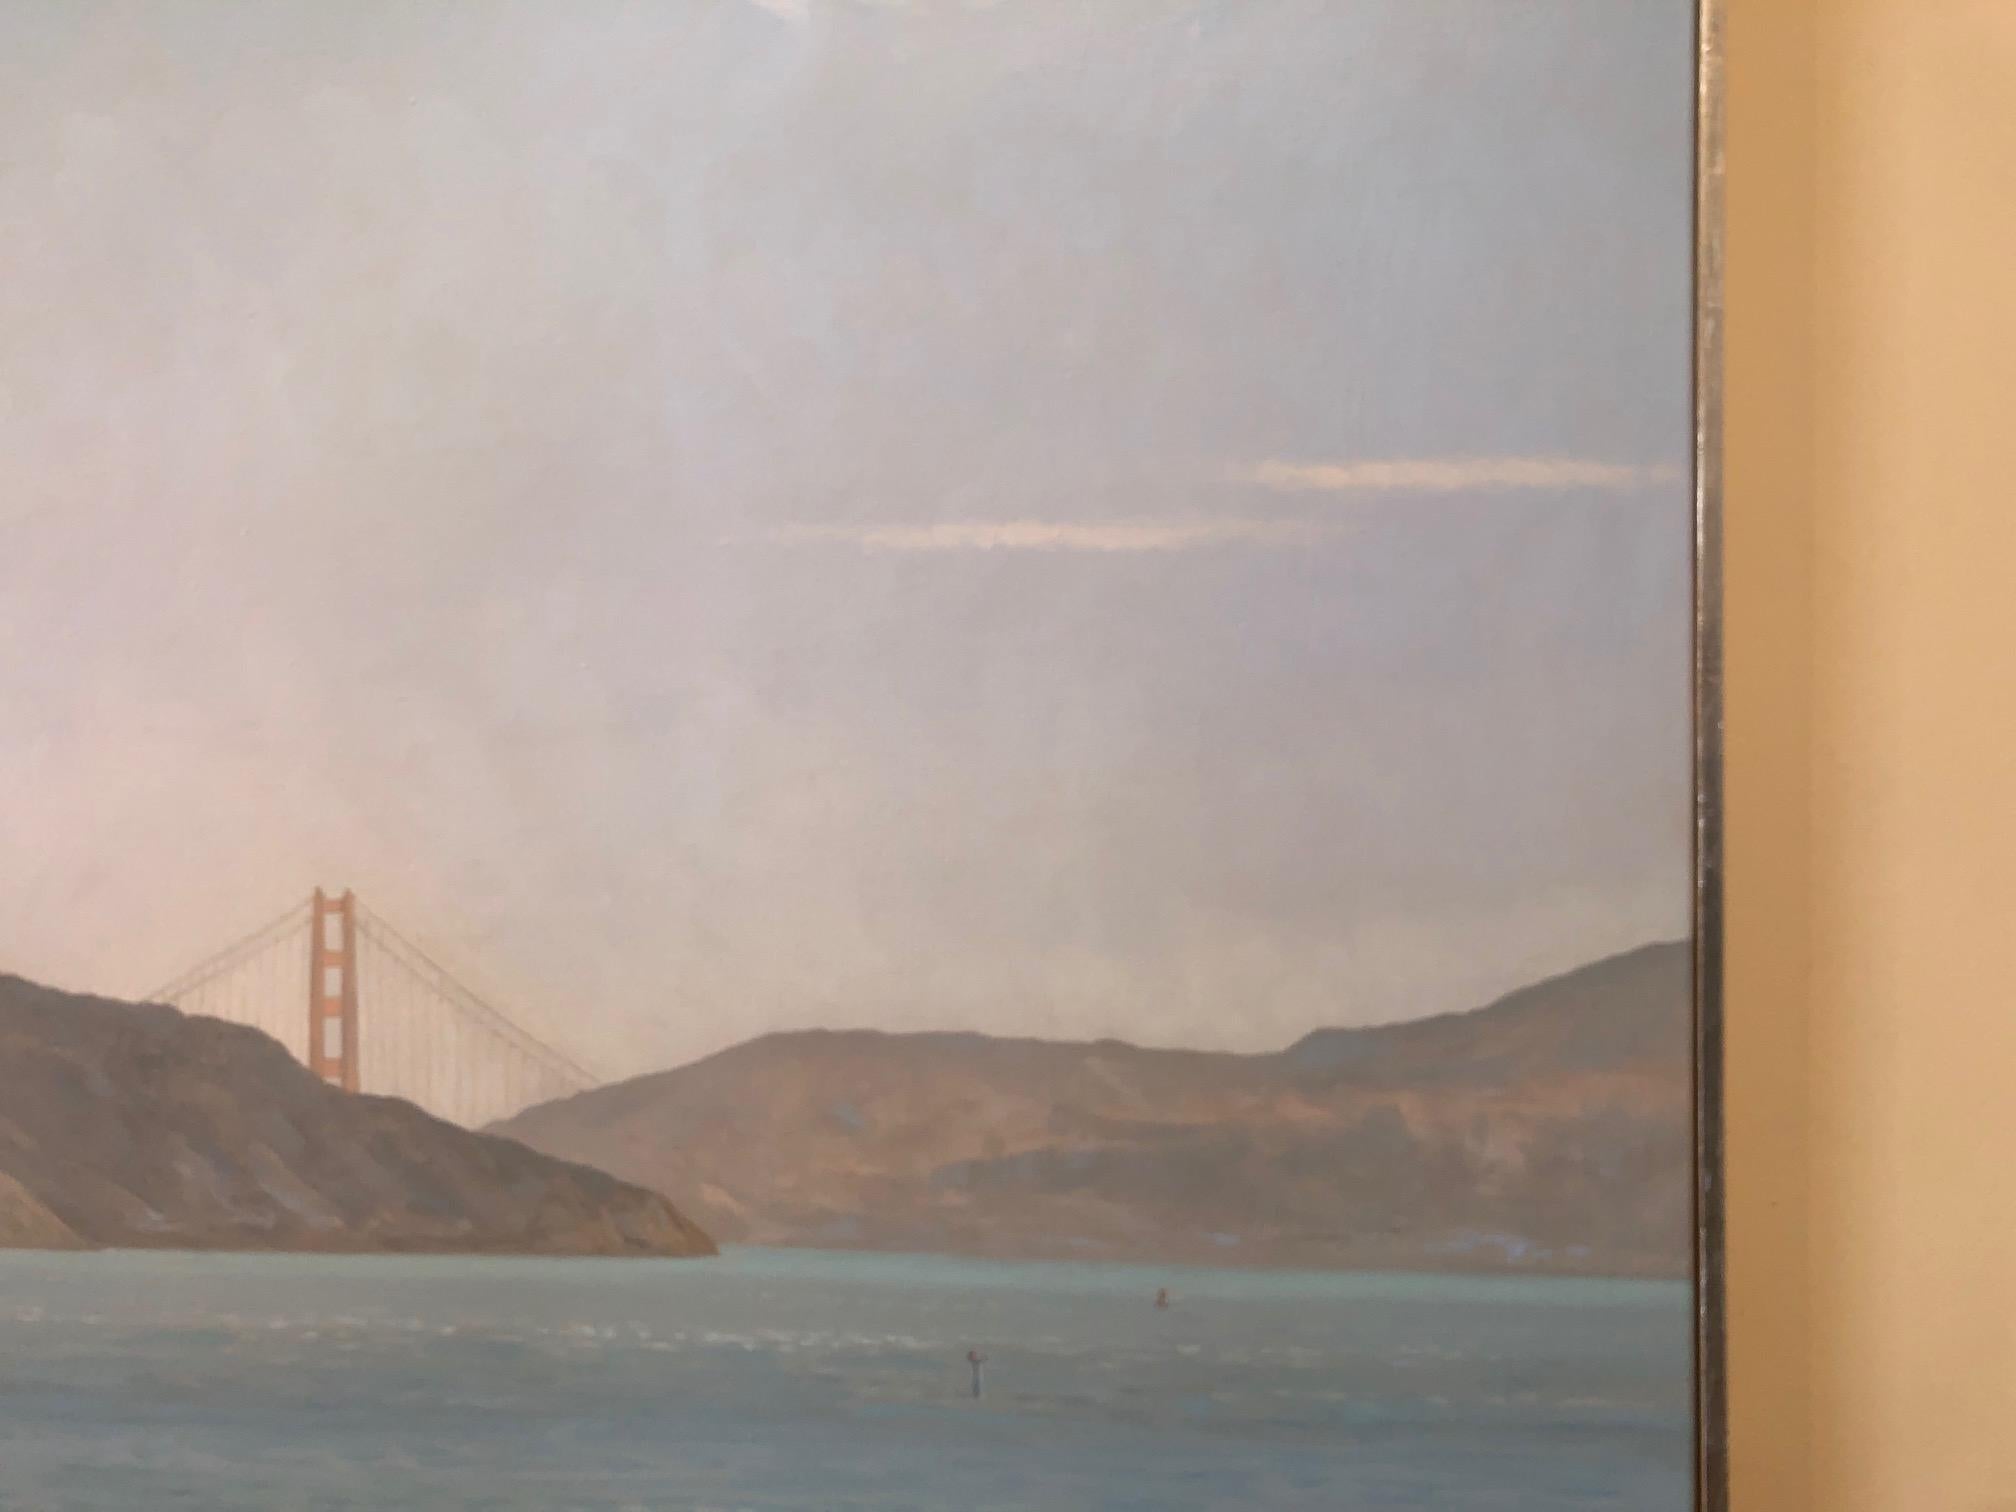 Racoon Strait / Golden Gate Bridge with sailing ship, CA landscape Realism  - Contemporary Painting by Willard Dixon